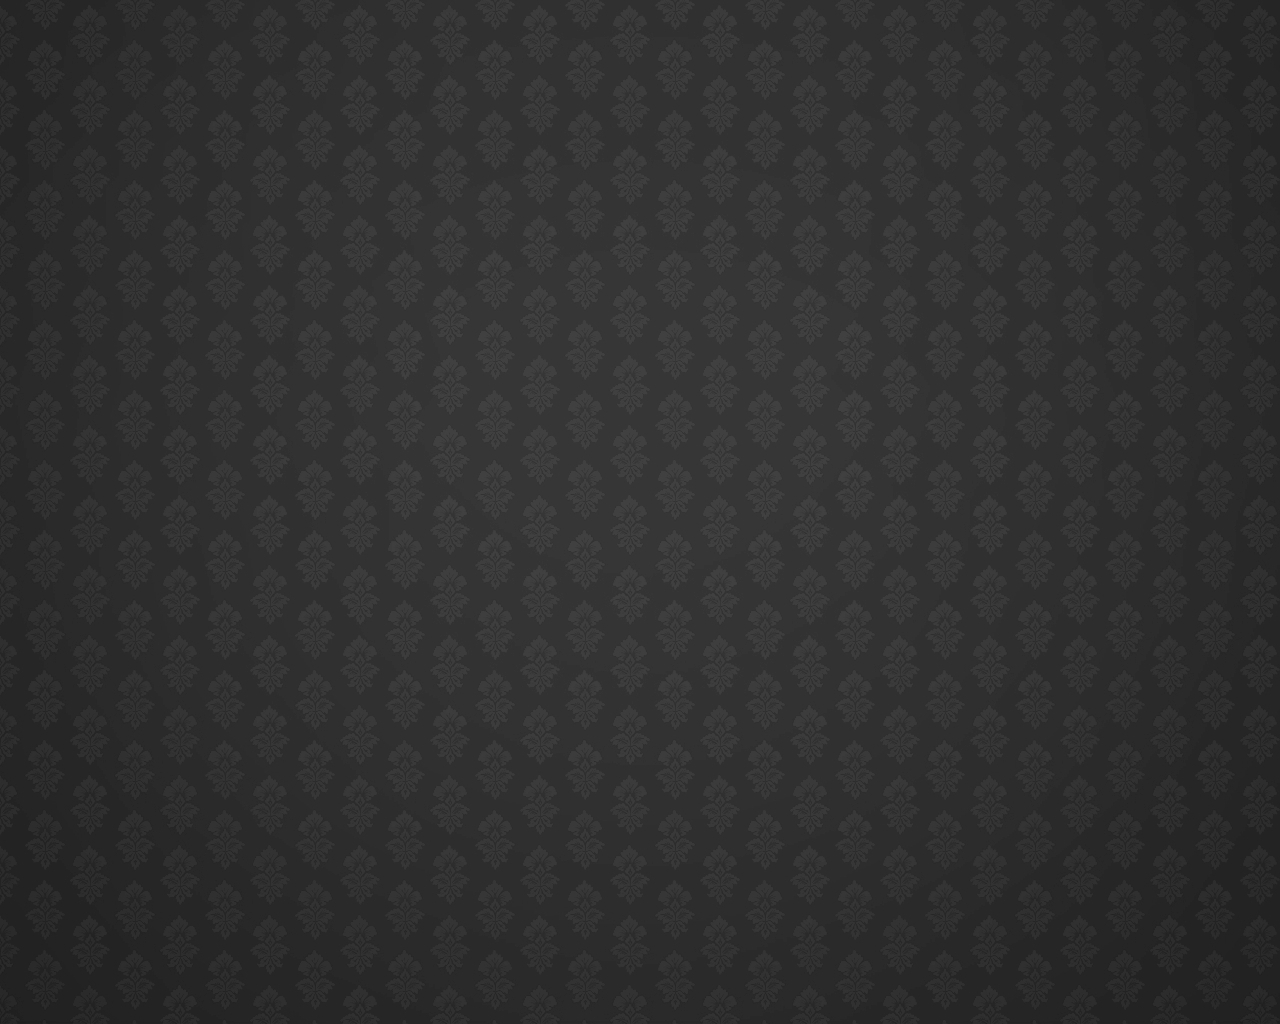  Grey backgrounds black shade wallpaper Full HD Wallpapers Points